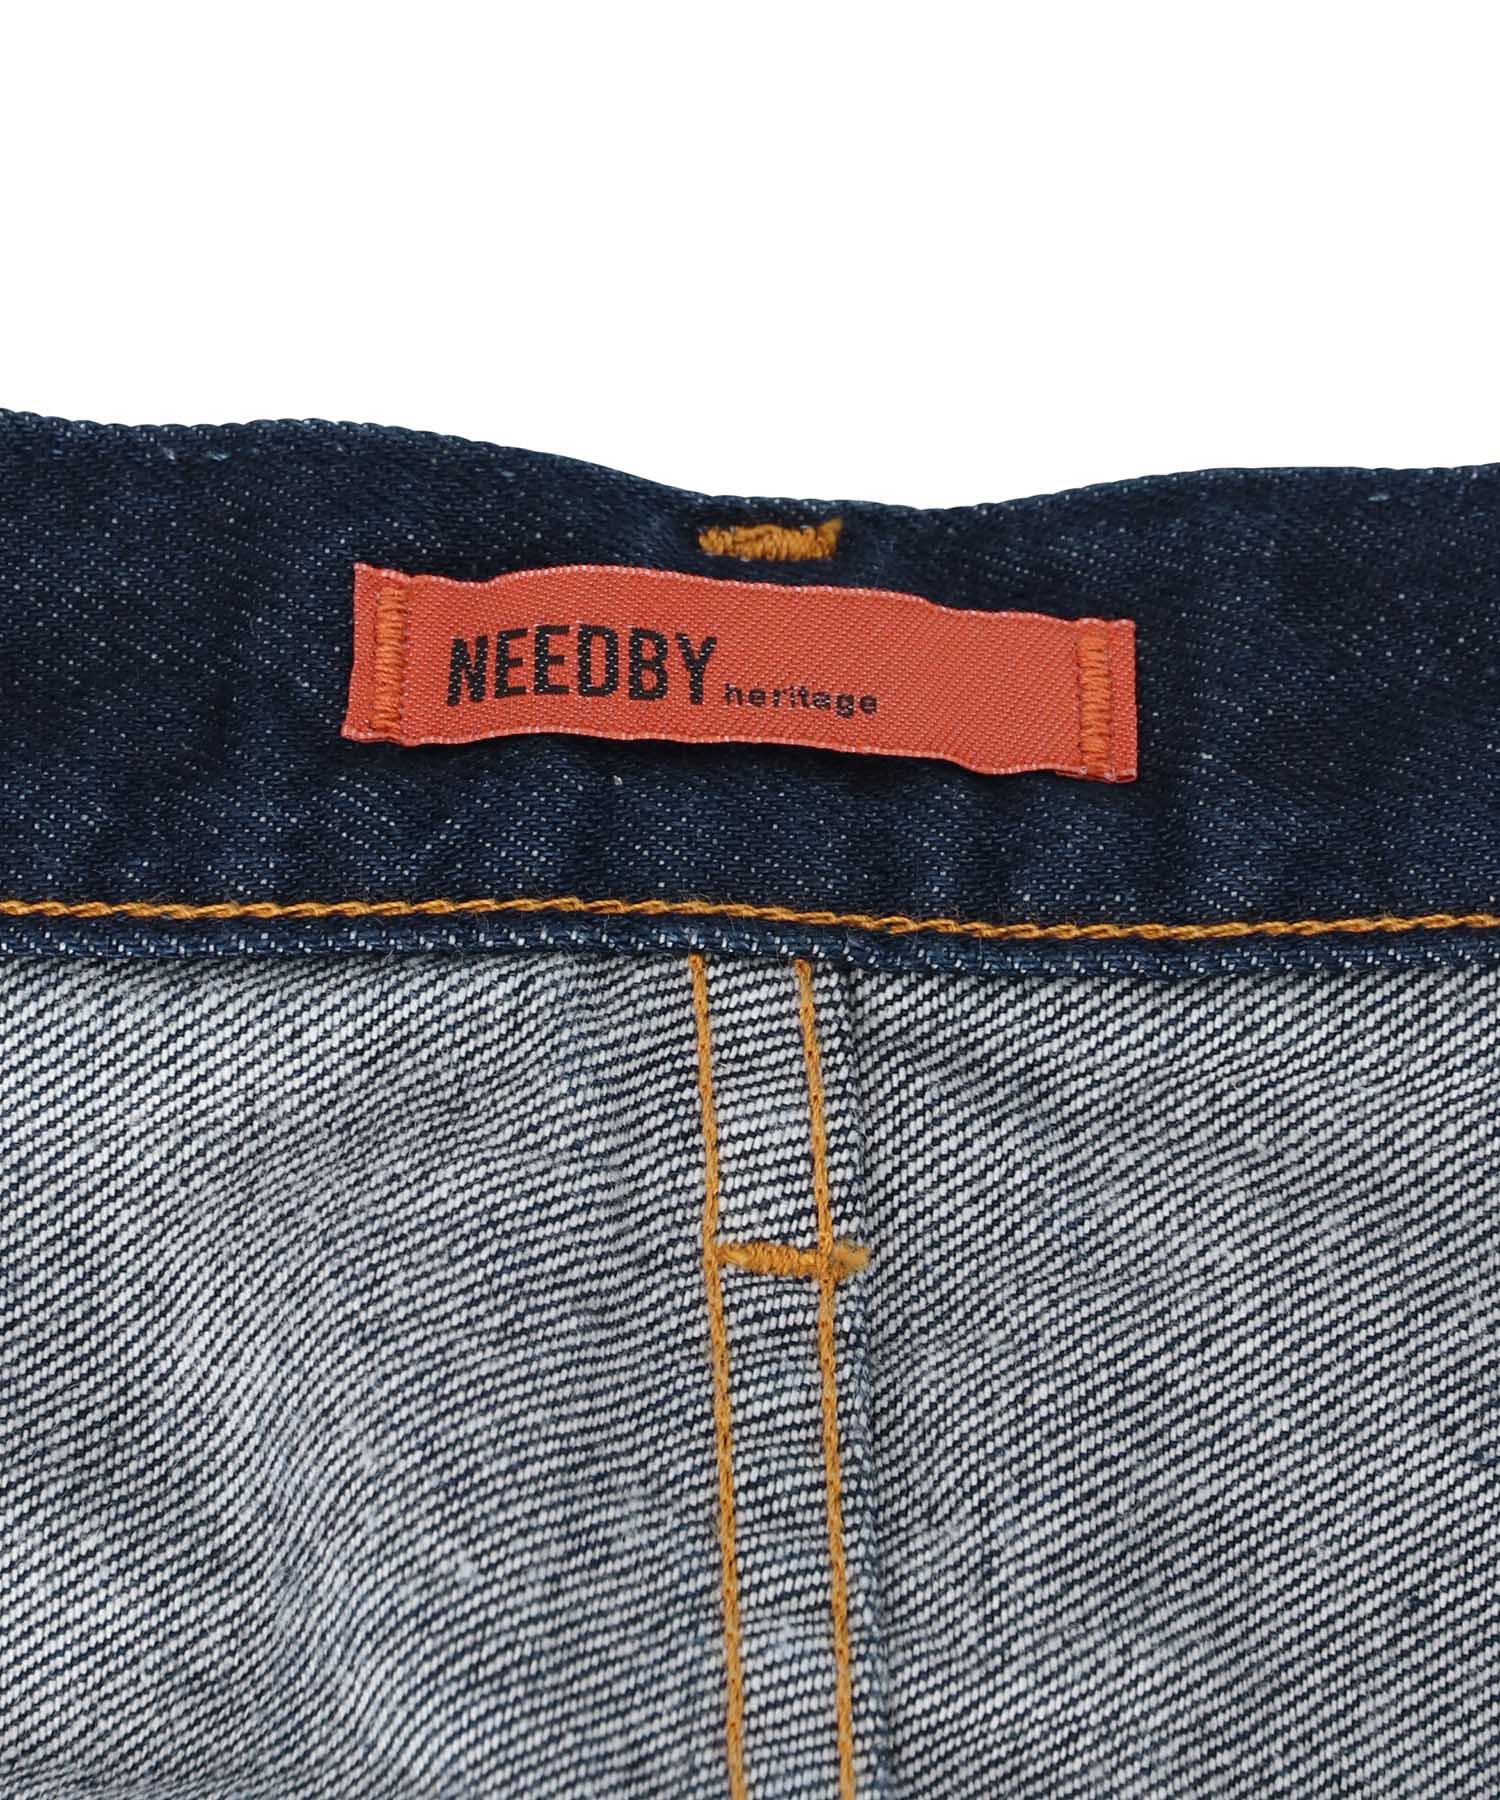 NEEDBY heritage SUPERWIDE WITH BELT